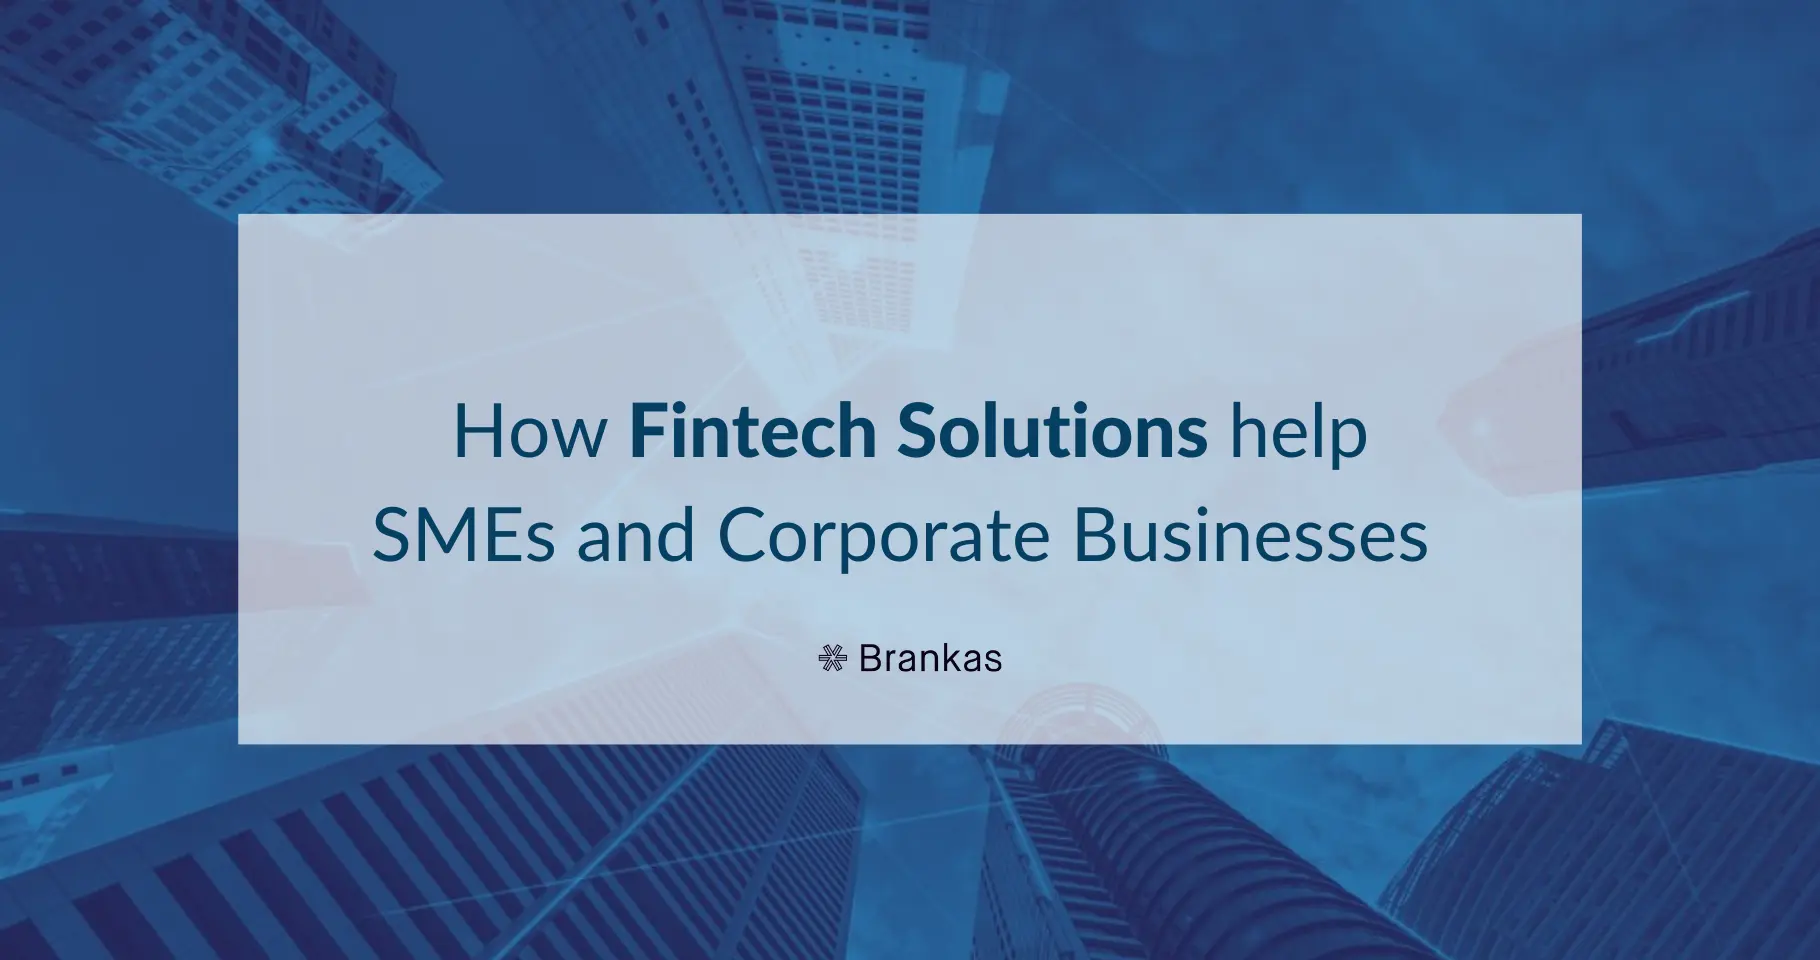 How Fintech Solutions help SMEs and Corporate Businesses